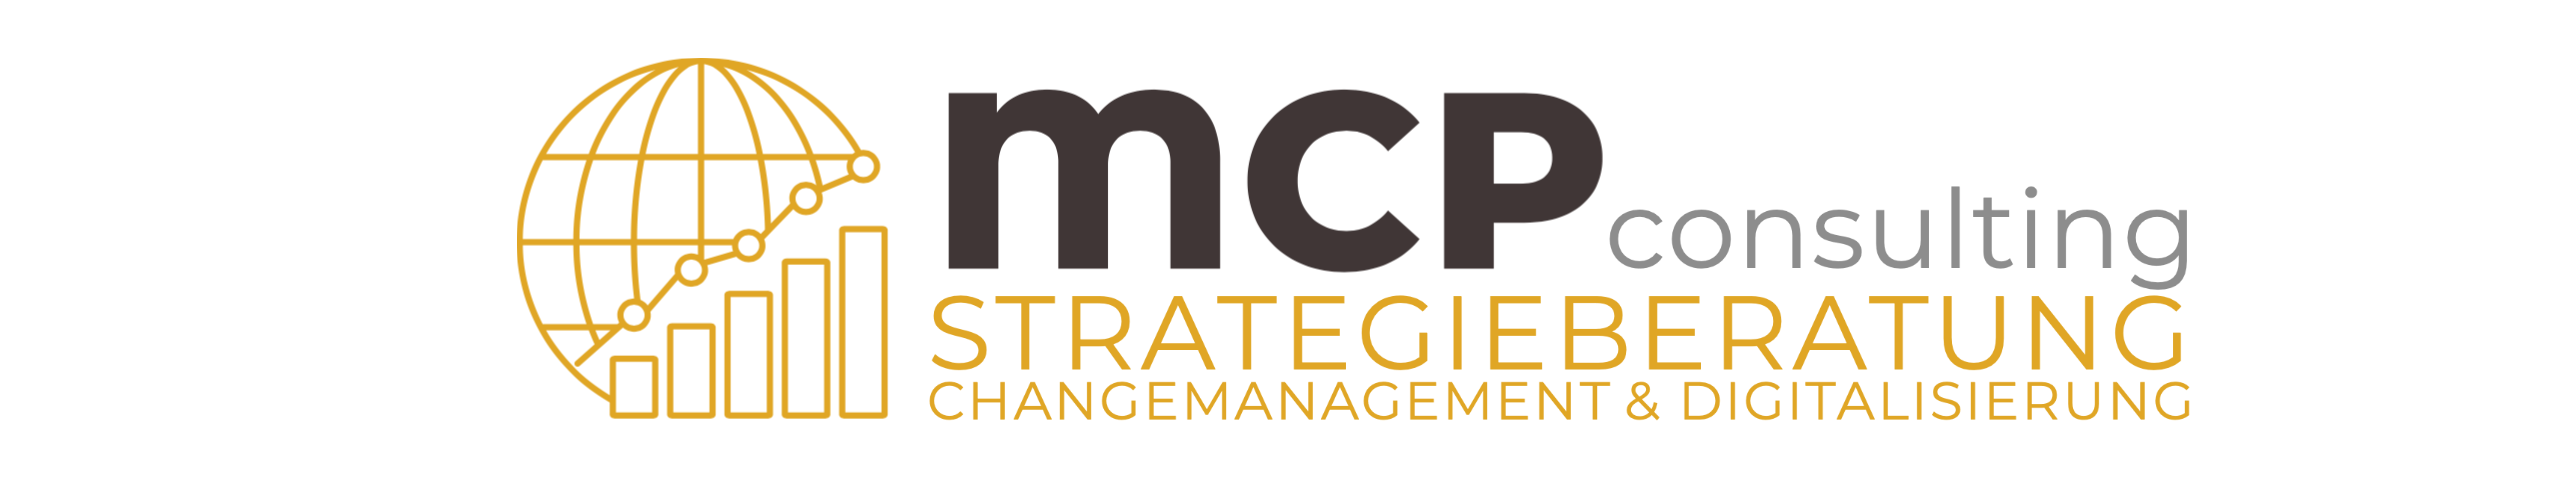 MCP consulting _4 cicd_transp